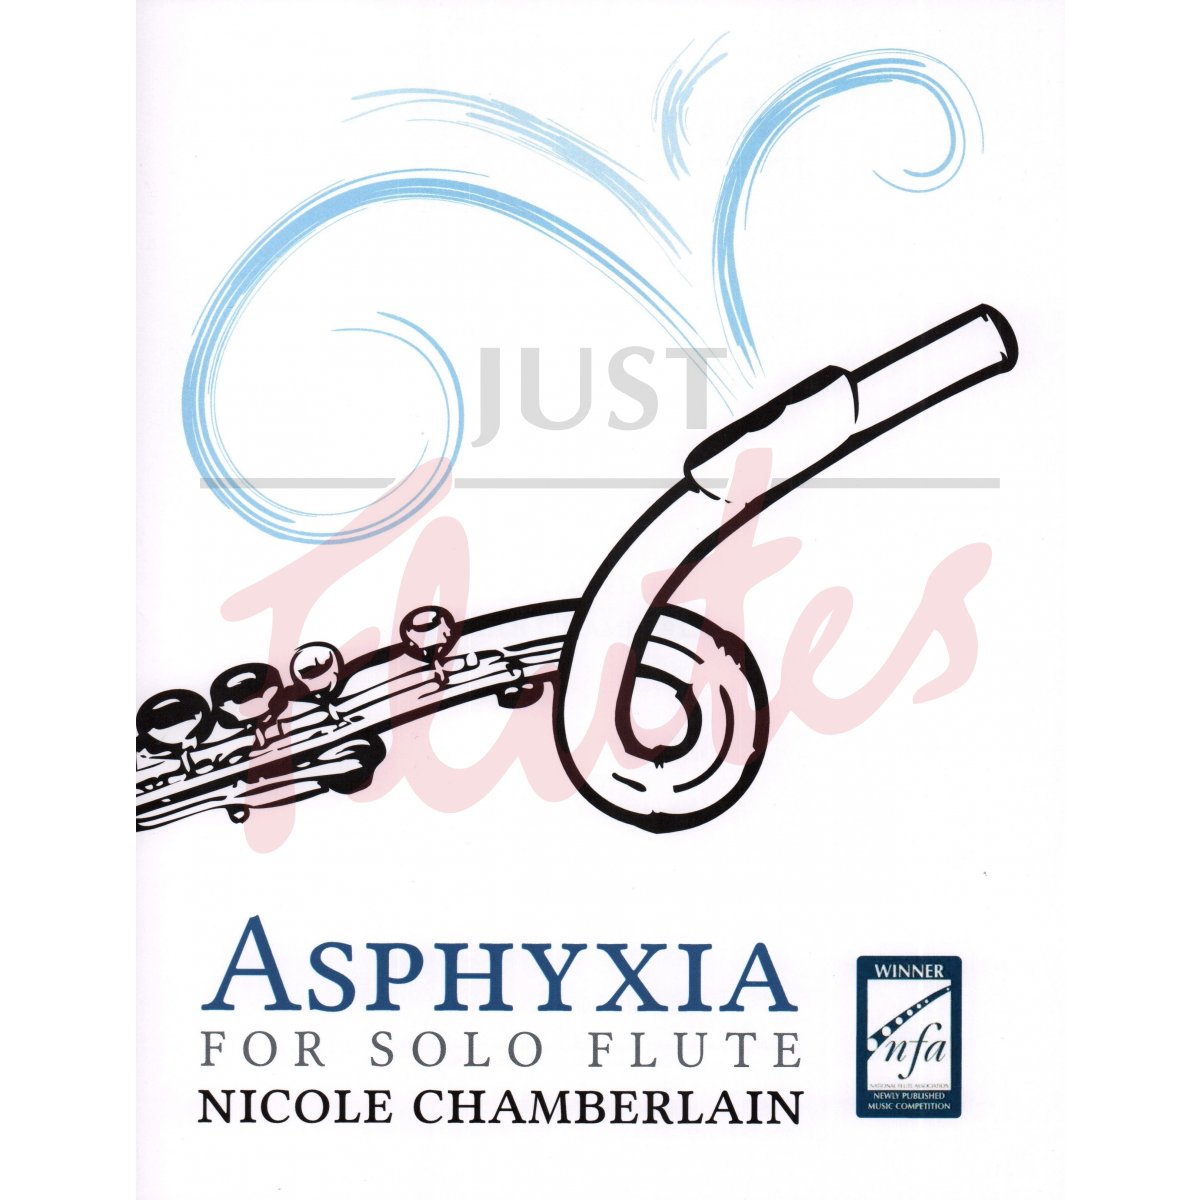 Asphyxia for Solo Flute